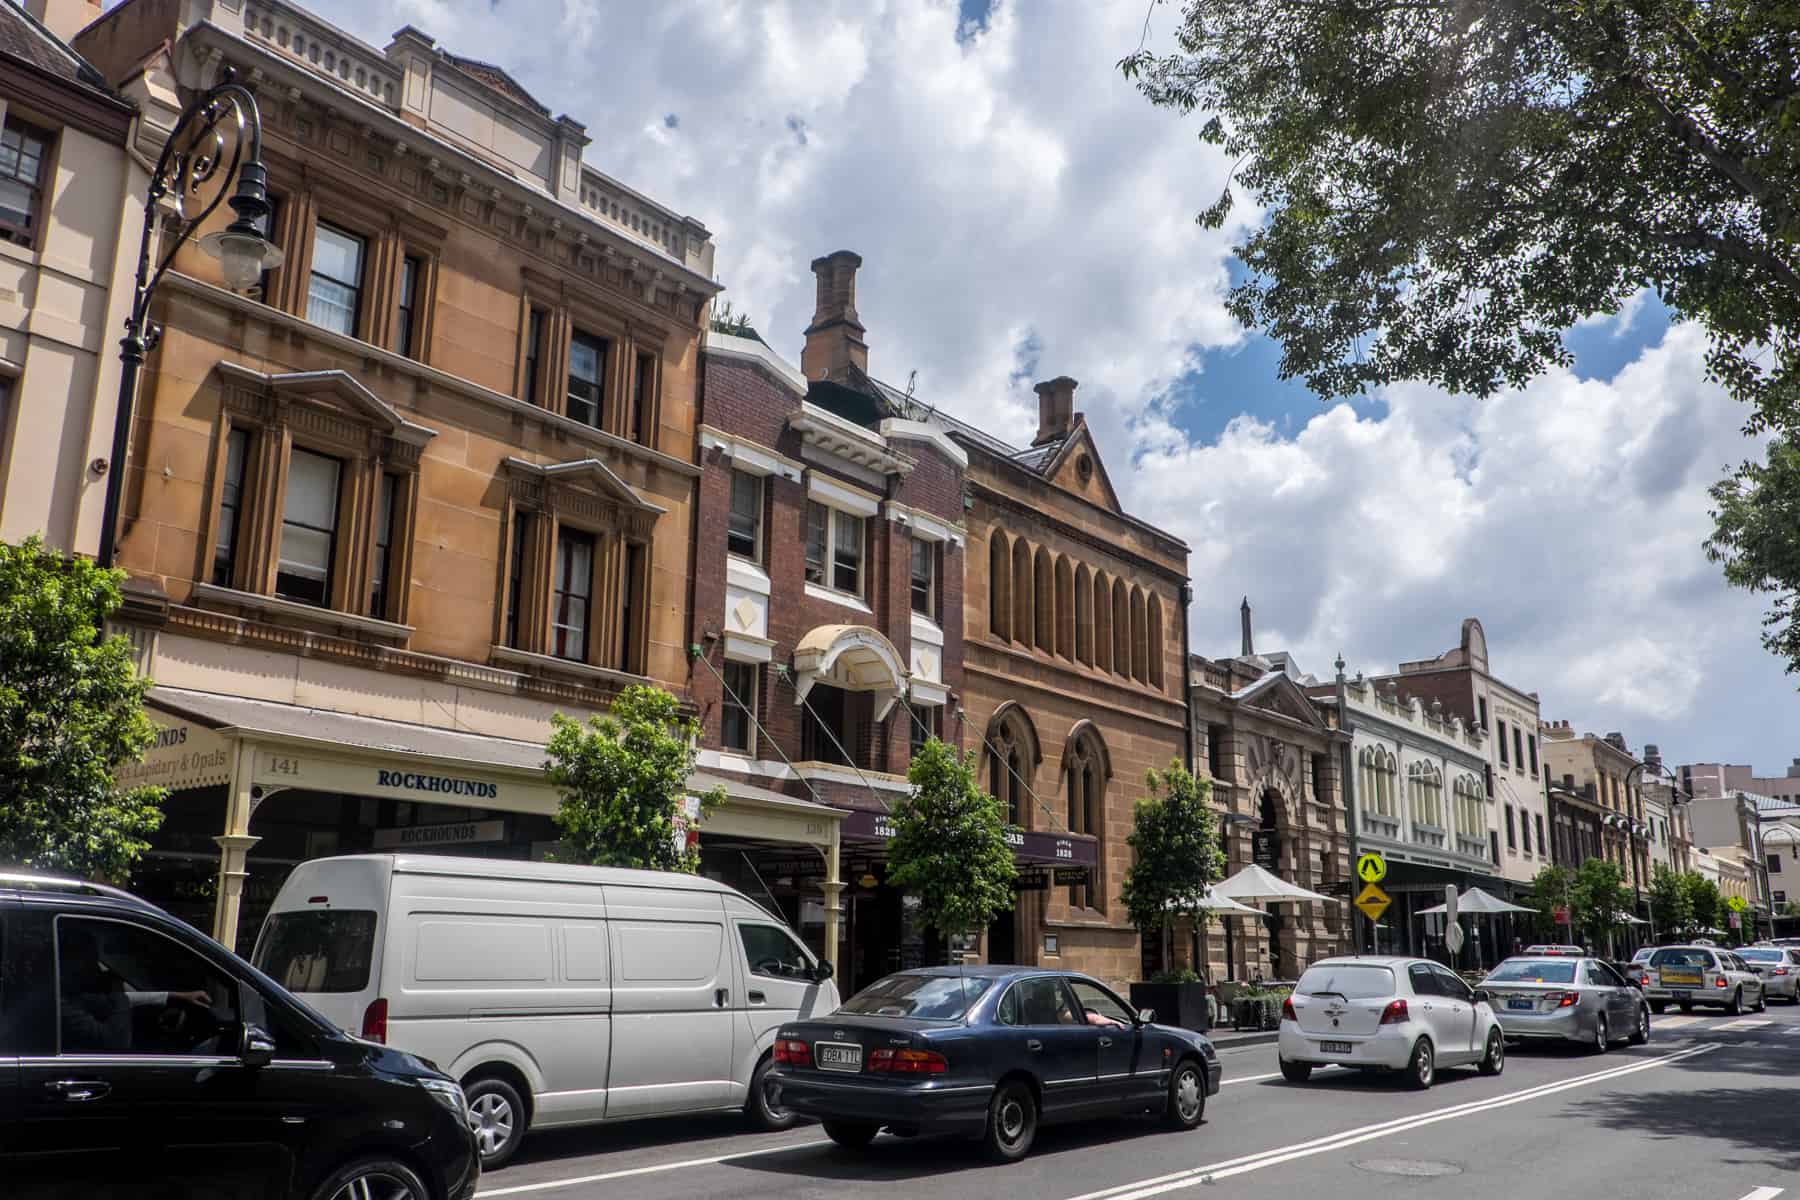 Historical brownhouse architectural buildings on a street in Sydney Australia